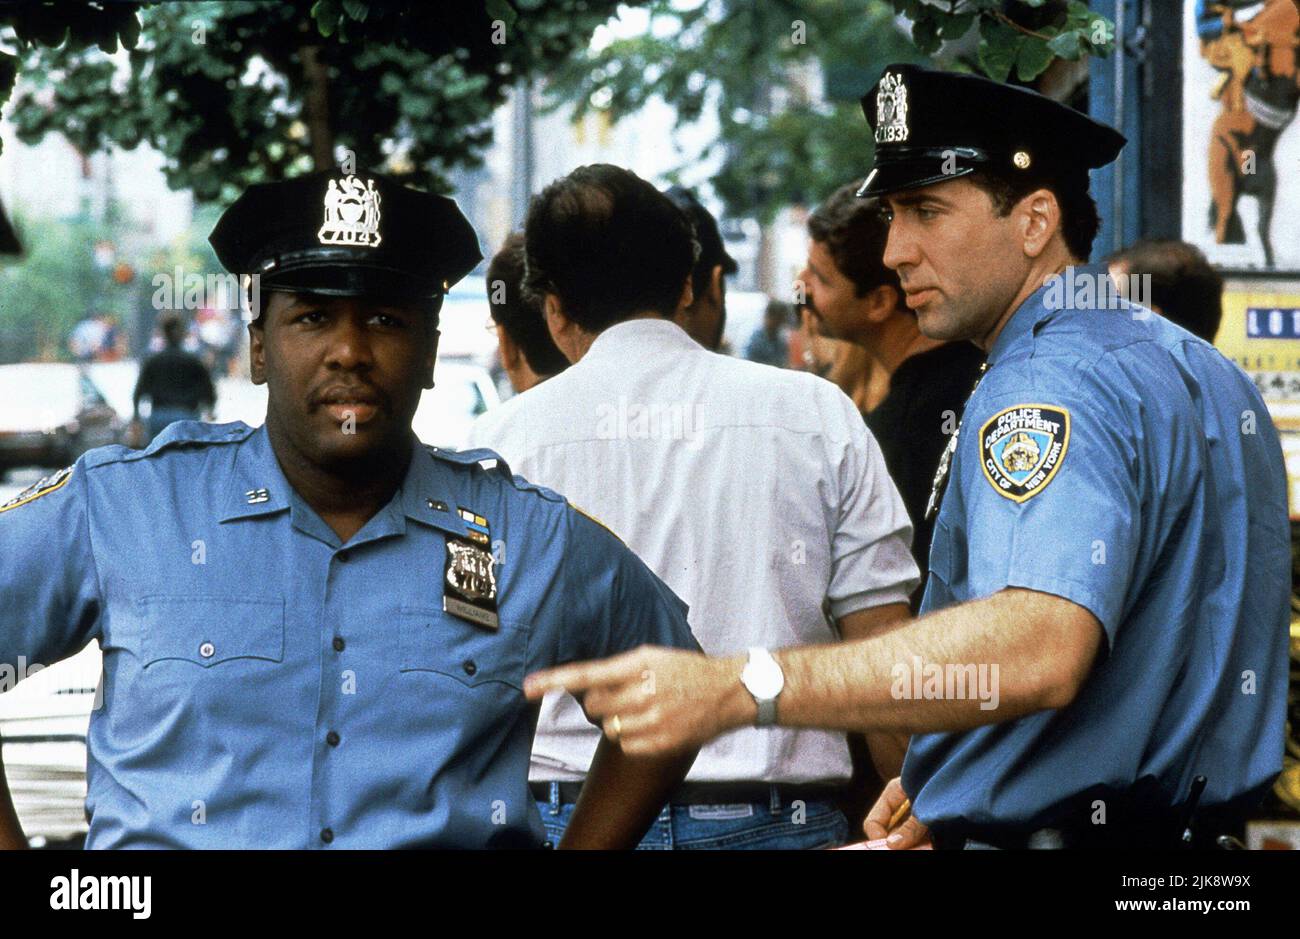 https://c8.alamy.com/comp/2JK8W9X/wendell-pierce-nicolas-cage-film-it-could-happen-to-you-1994-characters-bo-williams-charlie-lang-director-andrew-bergman-29-july-1994-warning-this-photograph-is-for-editorial-use-only-and-is-the-copyright-of-tristar-andor-the-photographer-assigned-by-the-film-or-production-company-and-can-only-be-reproduced-by-publications-in-conjunction-with-the-promotion-of-the-above-film-a-mandatory-credit-to-tristar-is-required-the-photographer-should-also-be-credited-when-known-no-commercial-use-can-be-granted-without-written-authority-from-the-film-company-2JK8W9X.jpg